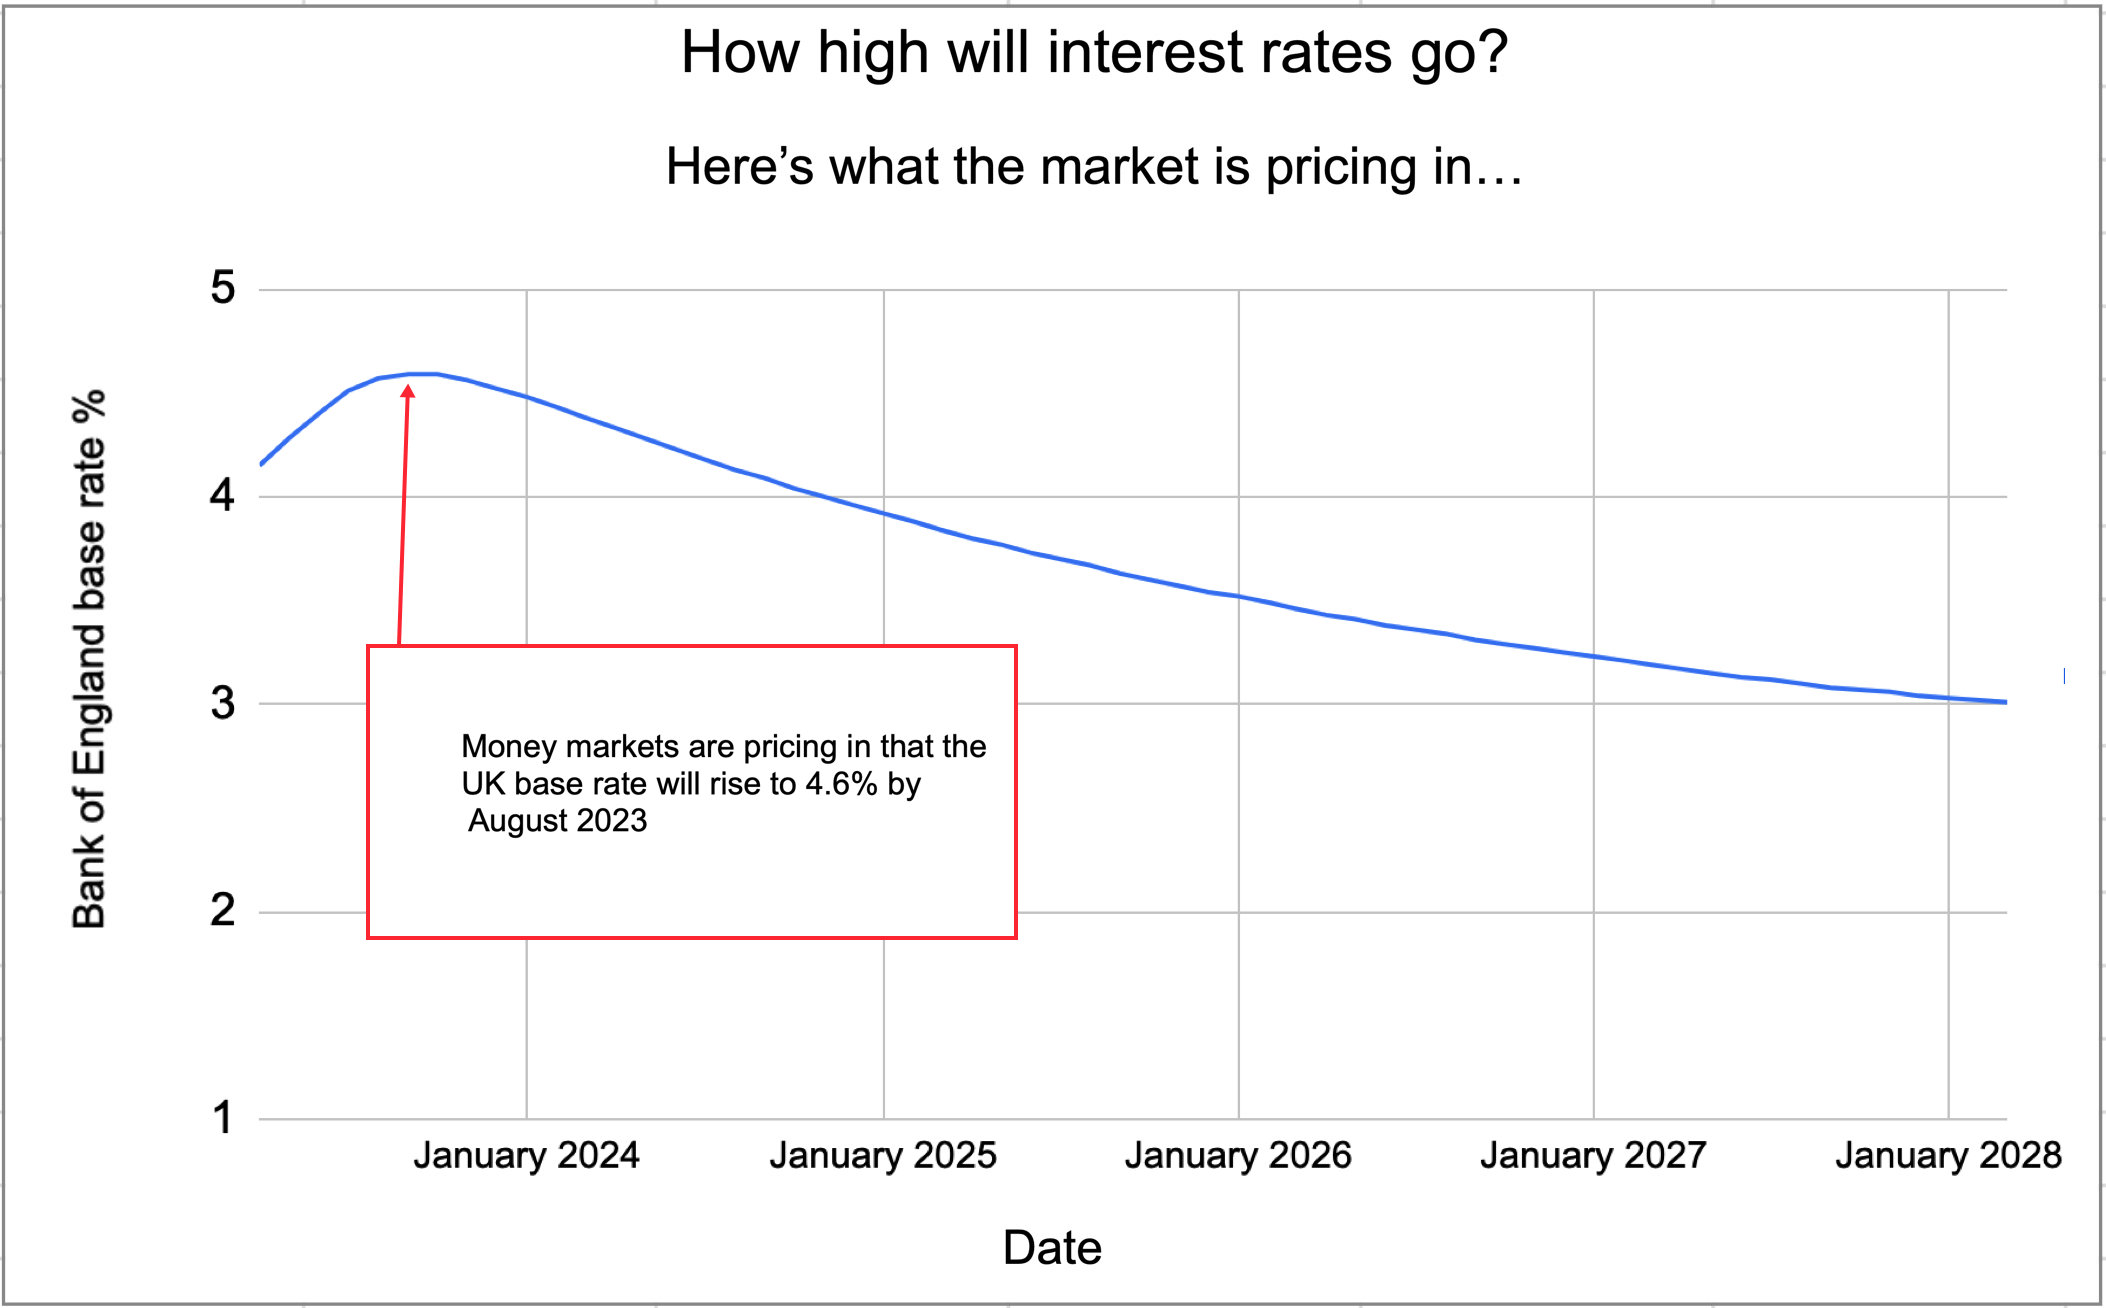 When will interest rates start to go down